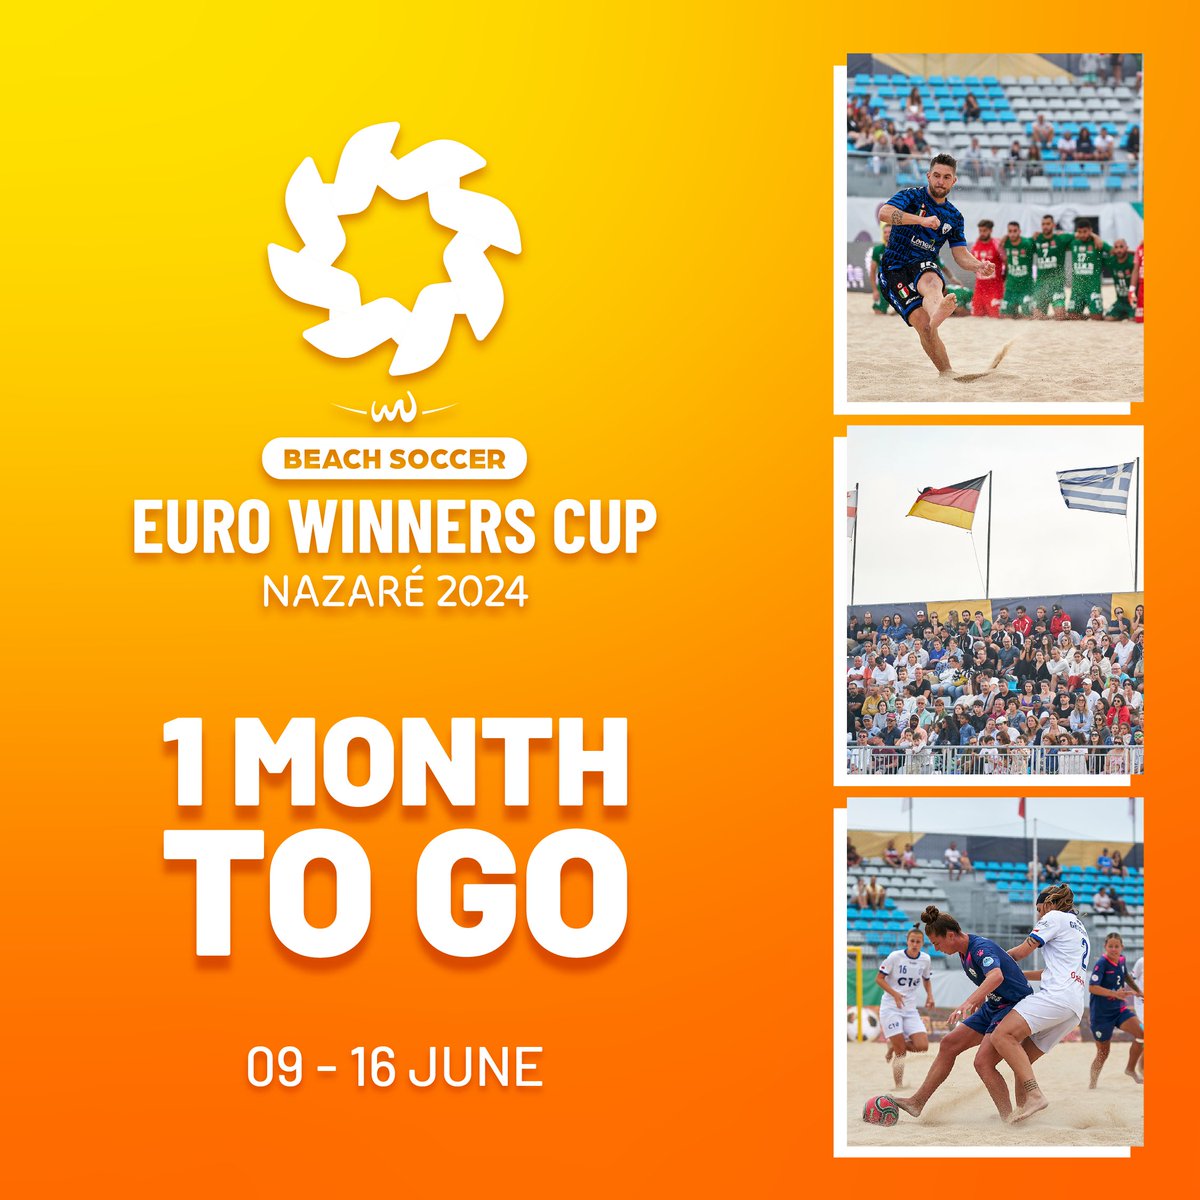 ⏰ 𝗢𝗡𝗟𝗬 1️⃣ 𝗠𝗢𝗡𝗧𝗛 𝗧𝗢 𝗚𝗢 until the Euro Winners Cup 2024 gets underway in #Nazaré 🏆🔥 𝗪𝗔𝗧𝗖𝗛 𝗔𝗟𝗟 𝗧𝗛𝗘 𝗠𝗔𝗧𝗖𝗛𝗘𝗦 from the #EWC2024 𝗟𝗜𝗩𝗘 𝗙𝗢𝗥 𝗙𝗥𝗘𝗘 on Beach Soccer TV! 🤩📺 Who’s ready? 🤔 #BeachSoccer